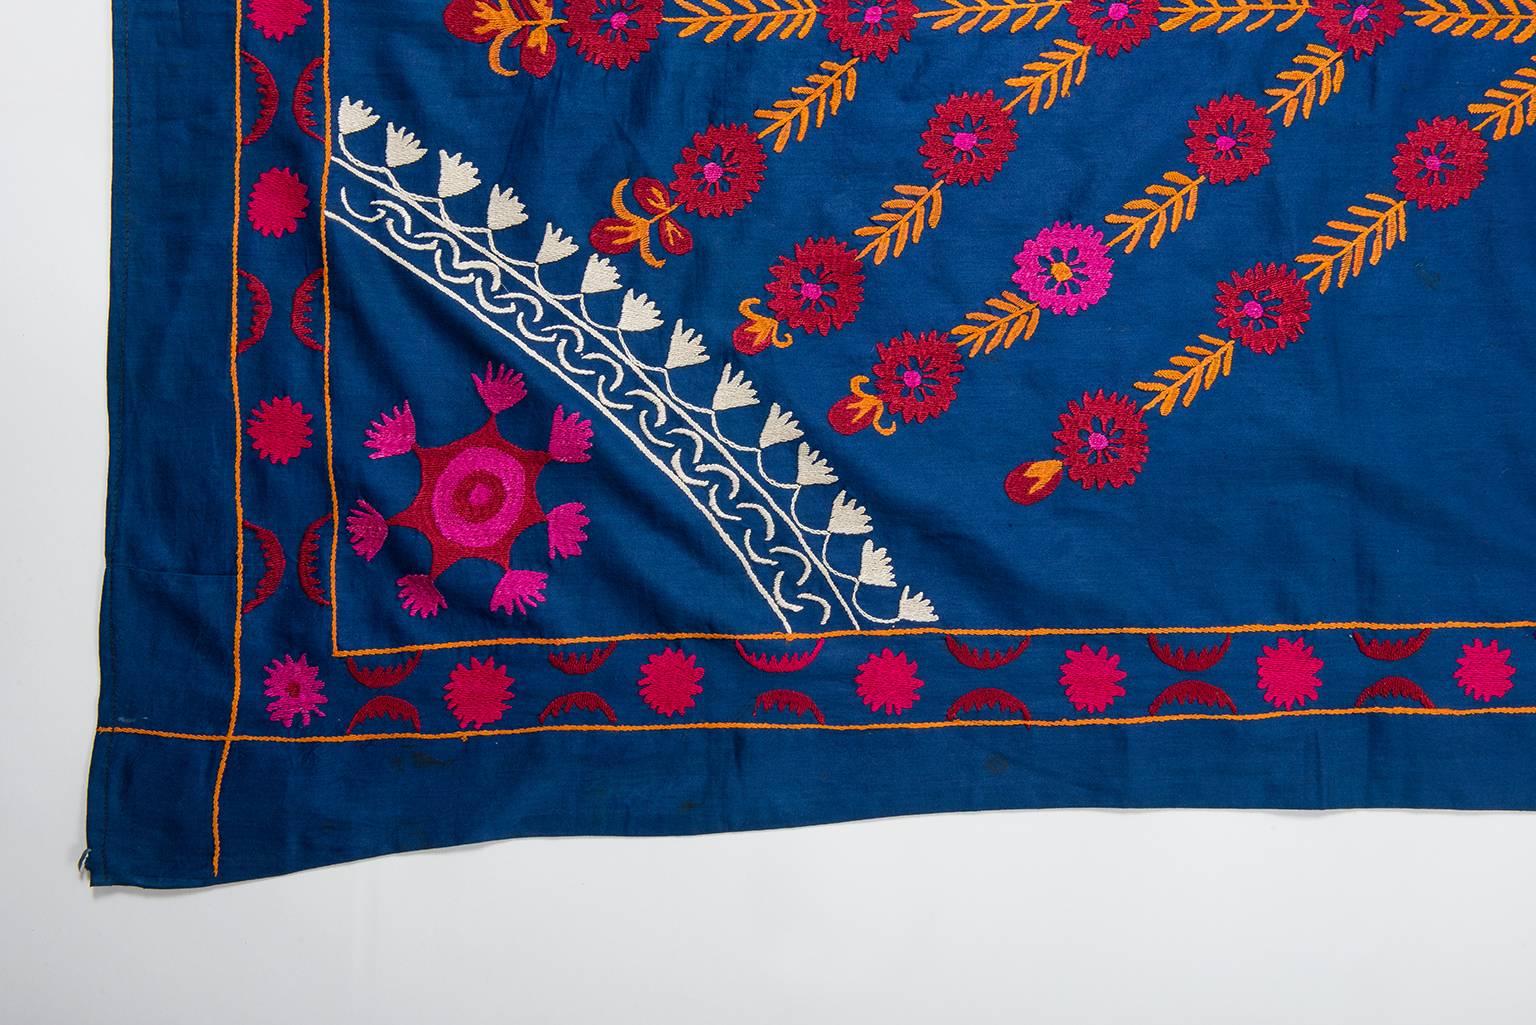 Embroidered  Uzbekistan  Susani, Suitable as Bedspread or Table Cover